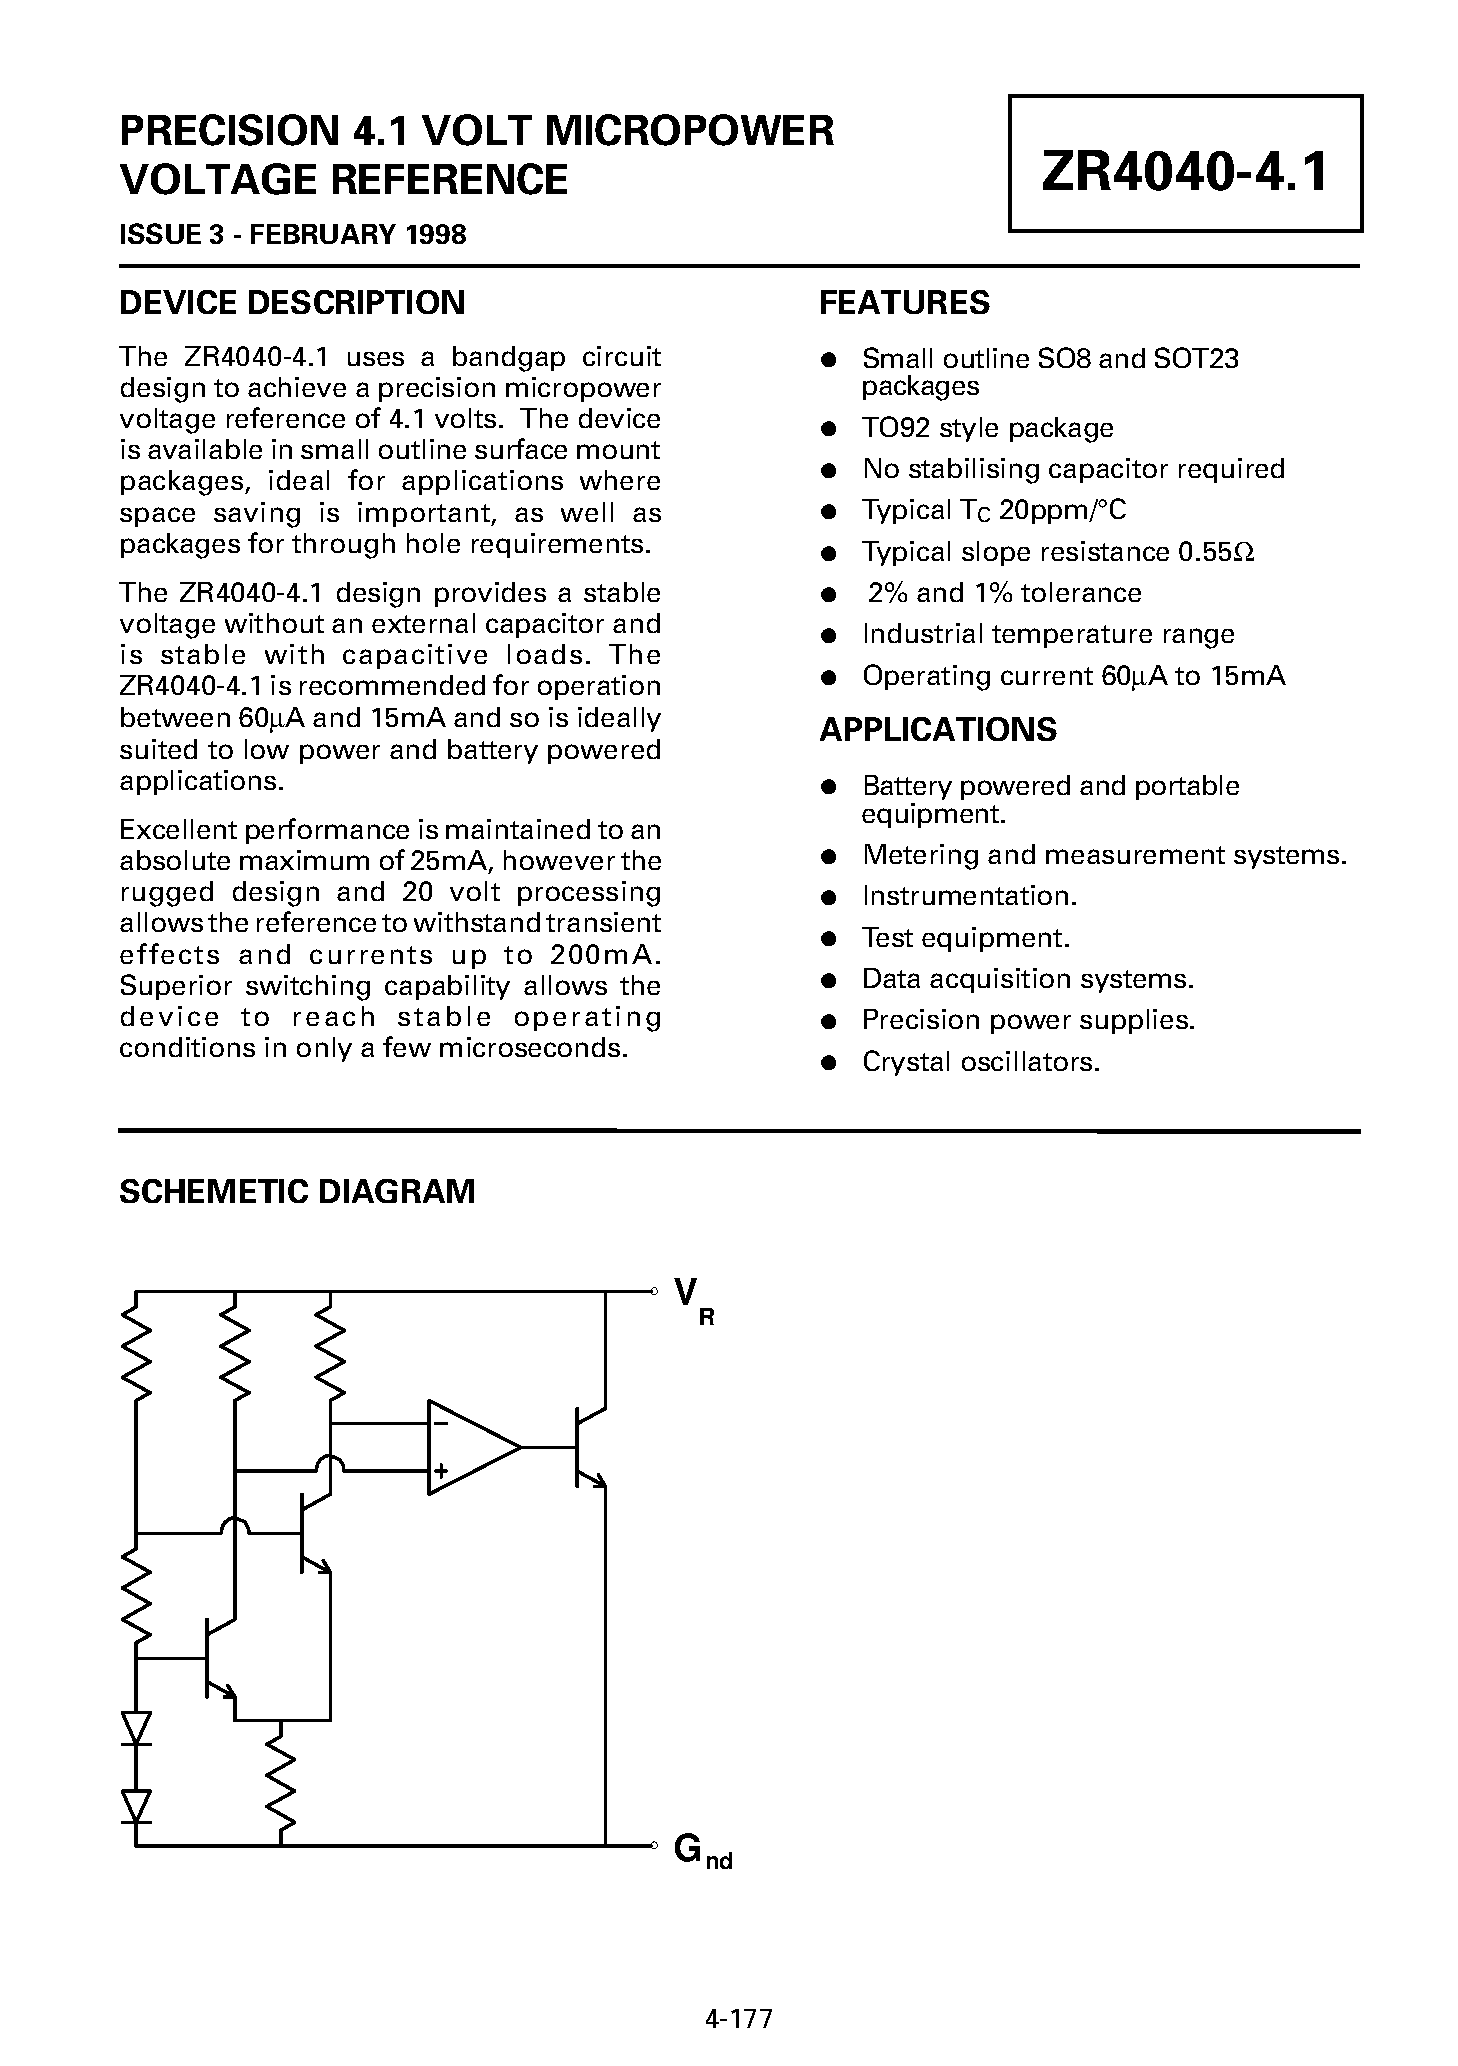 Datasheet ZR4040-4.1 - PRECISION 4.1 VOLT MICROPOWER VOLTAGE REFERENCE page 1